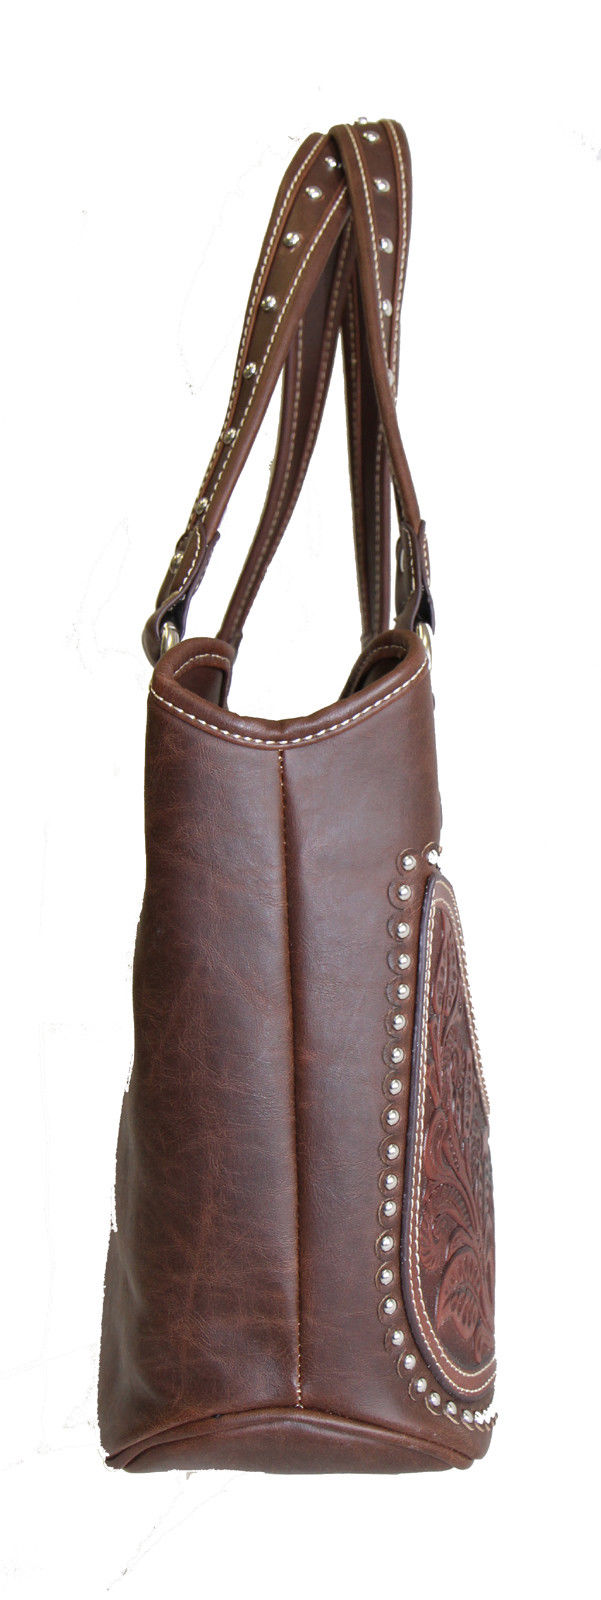 Concealed Carry Western Tooled Leather Shoulder Bag - Coffee